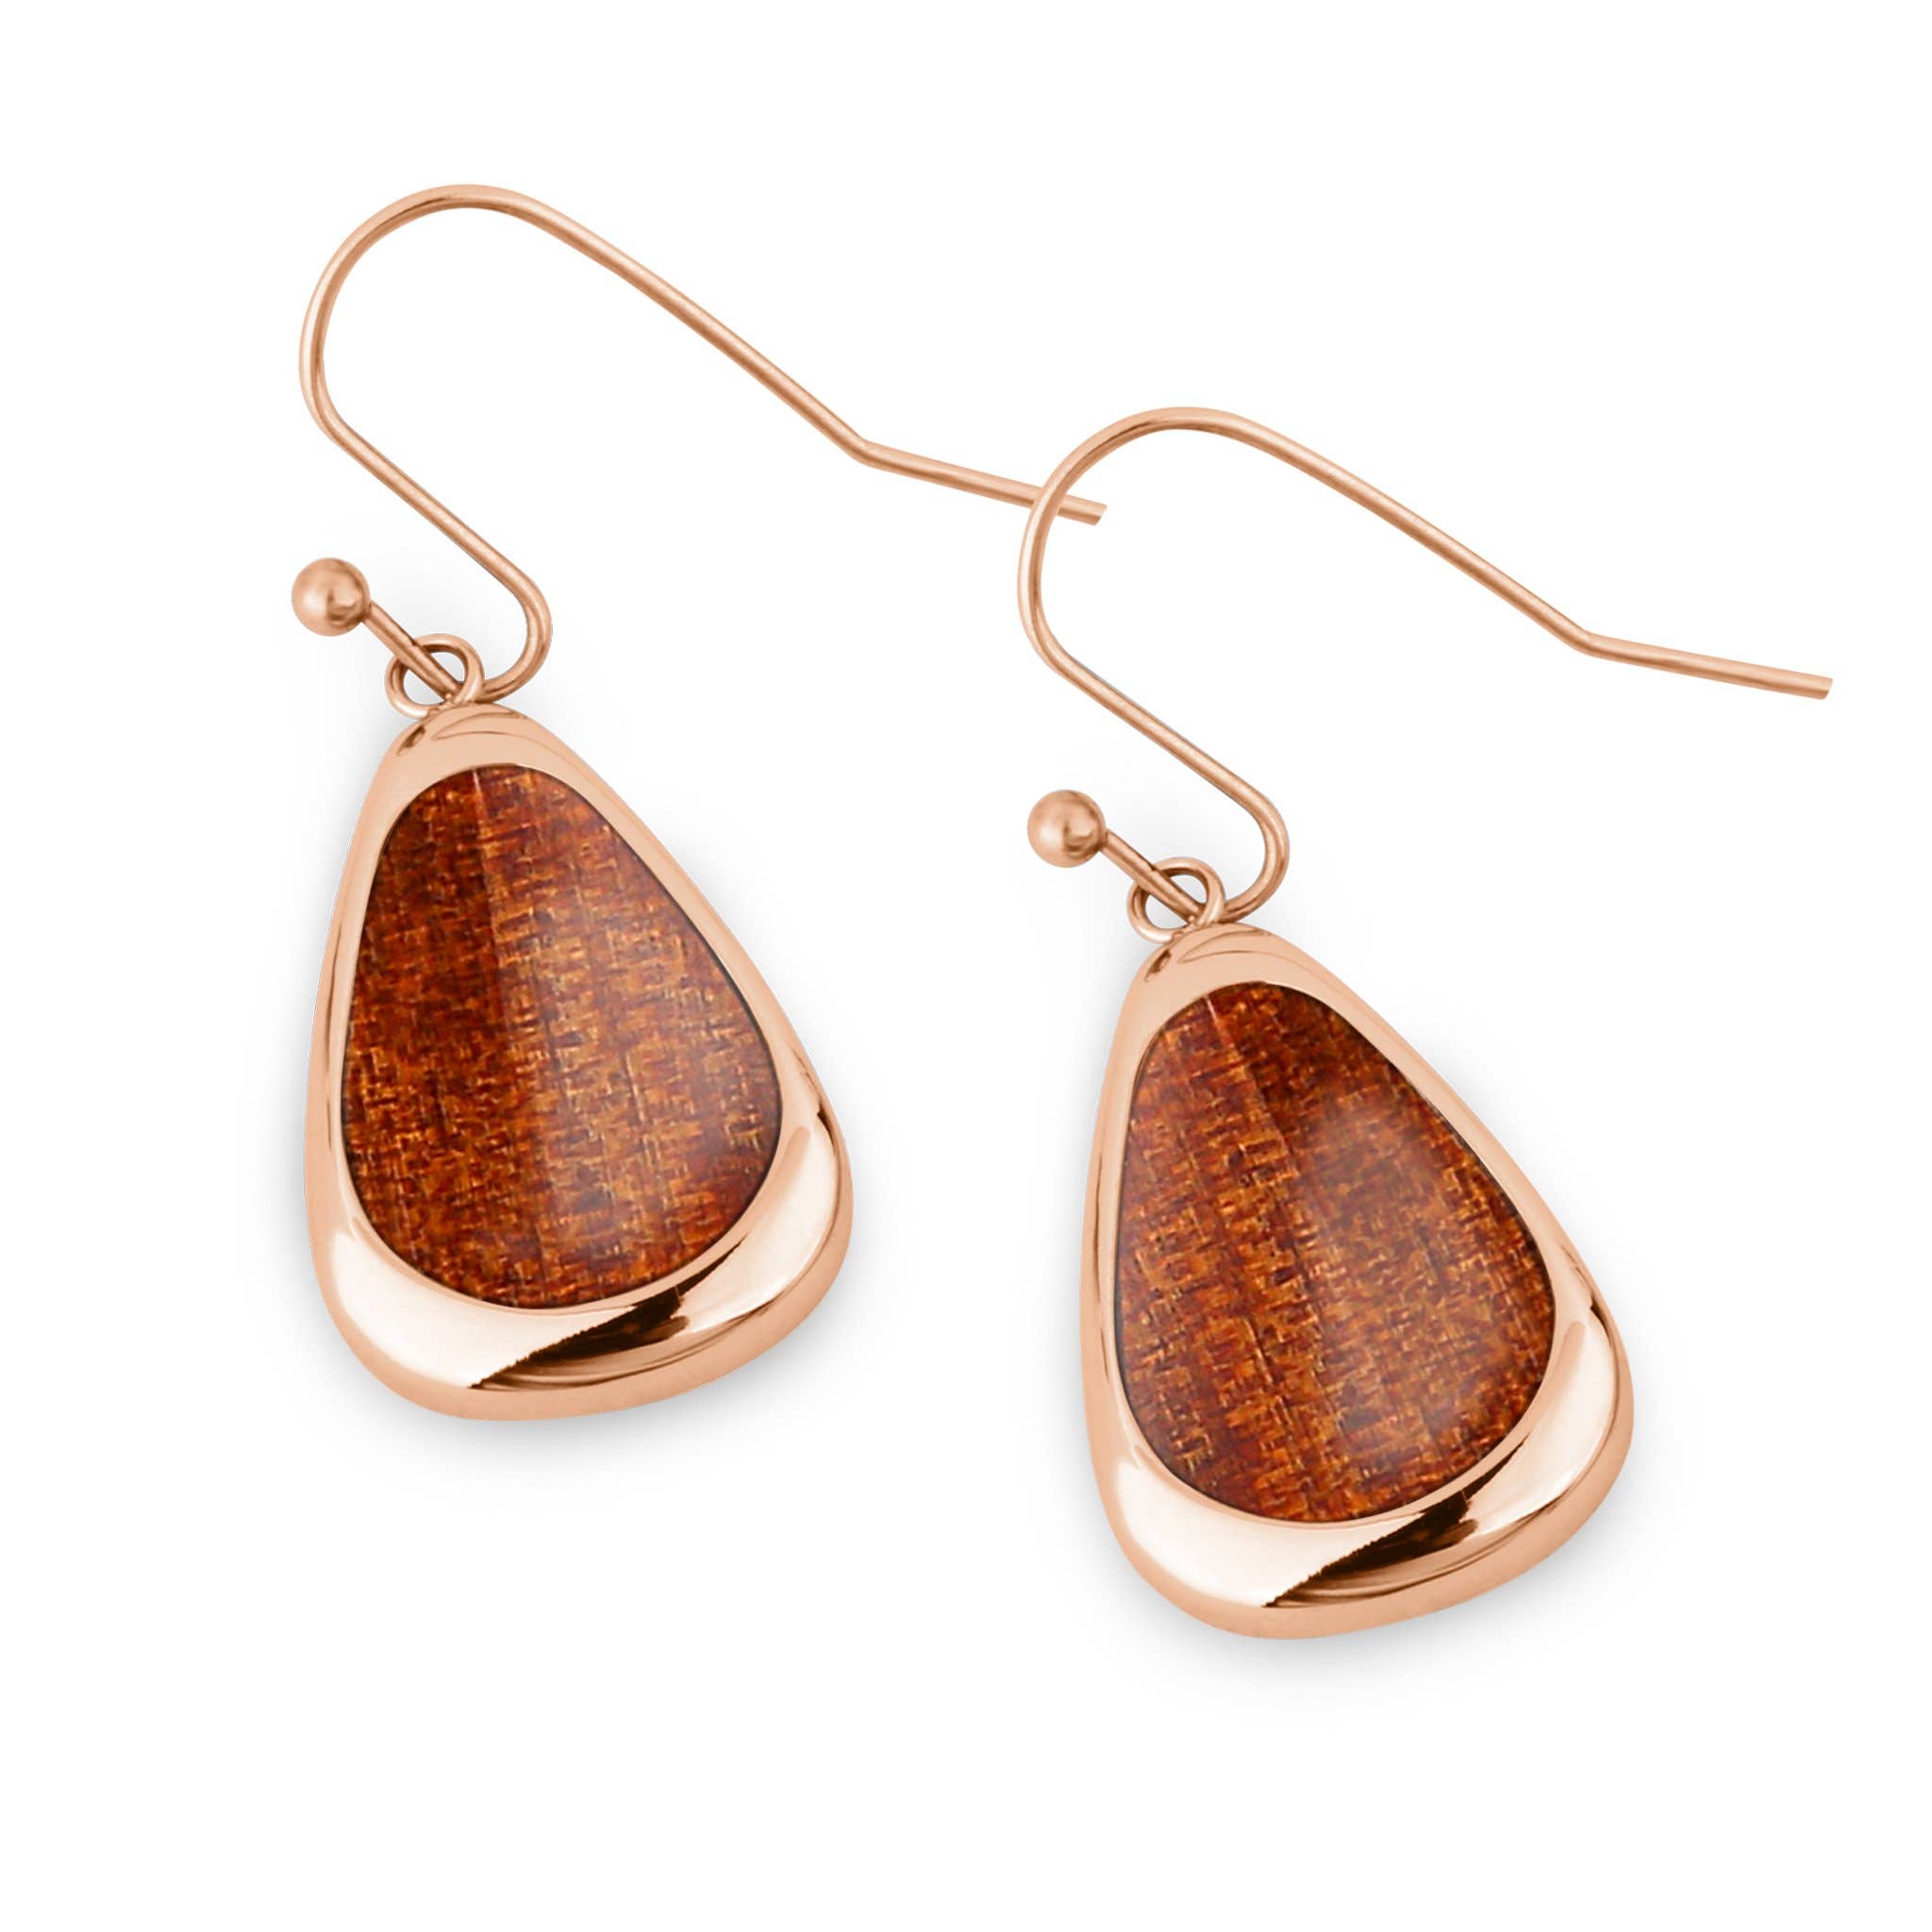 Kauri Hoops in gold-plated stainless steel